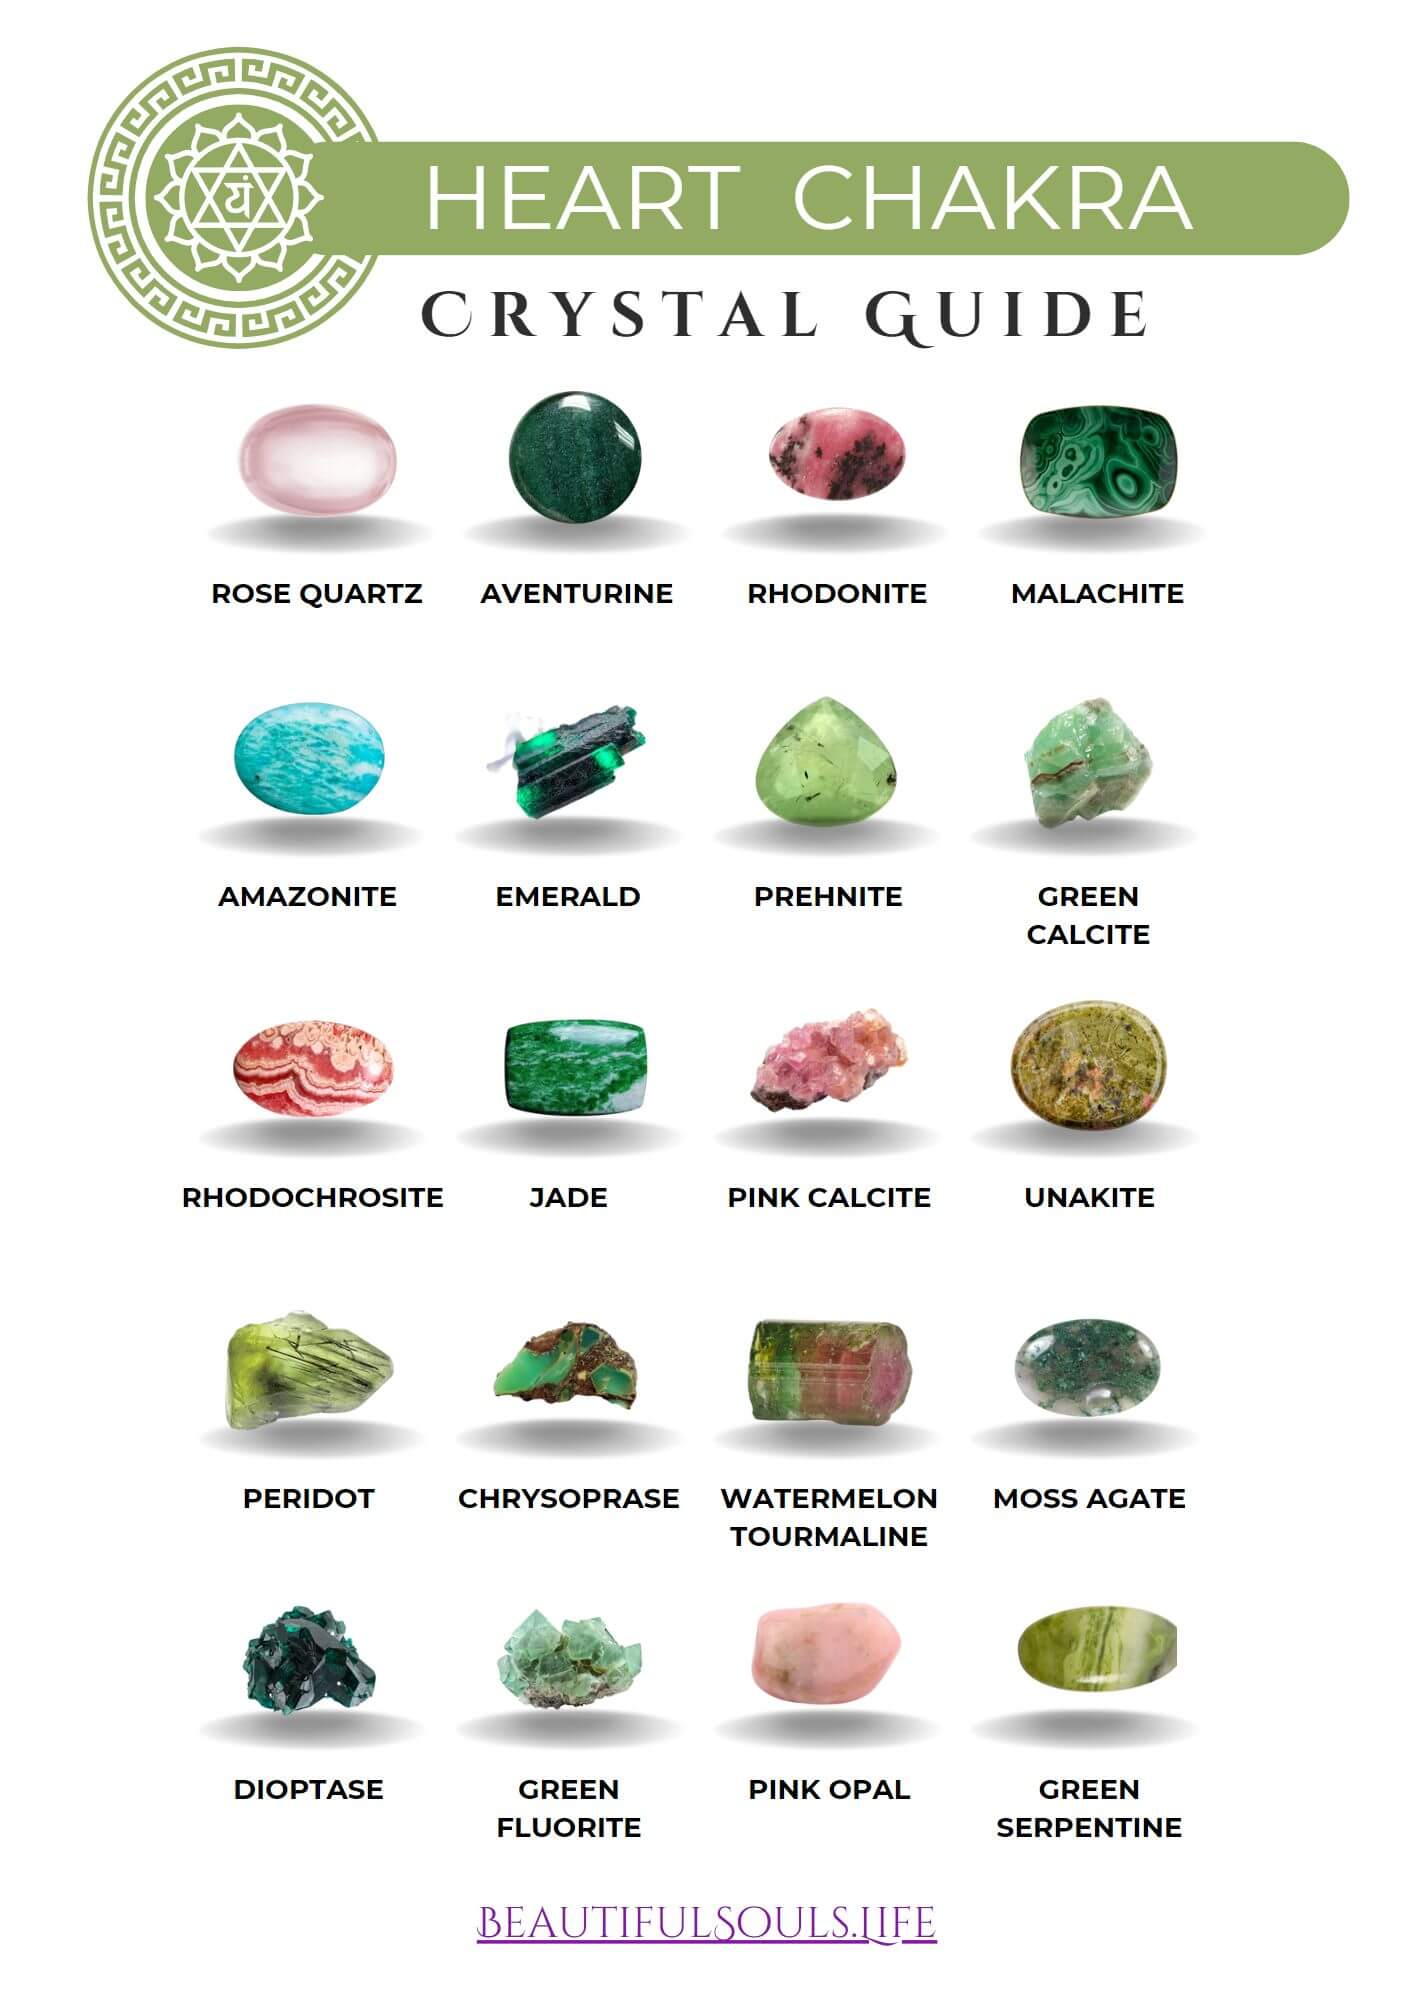 Chart of minerals and crystals for 4th Heart Chakra